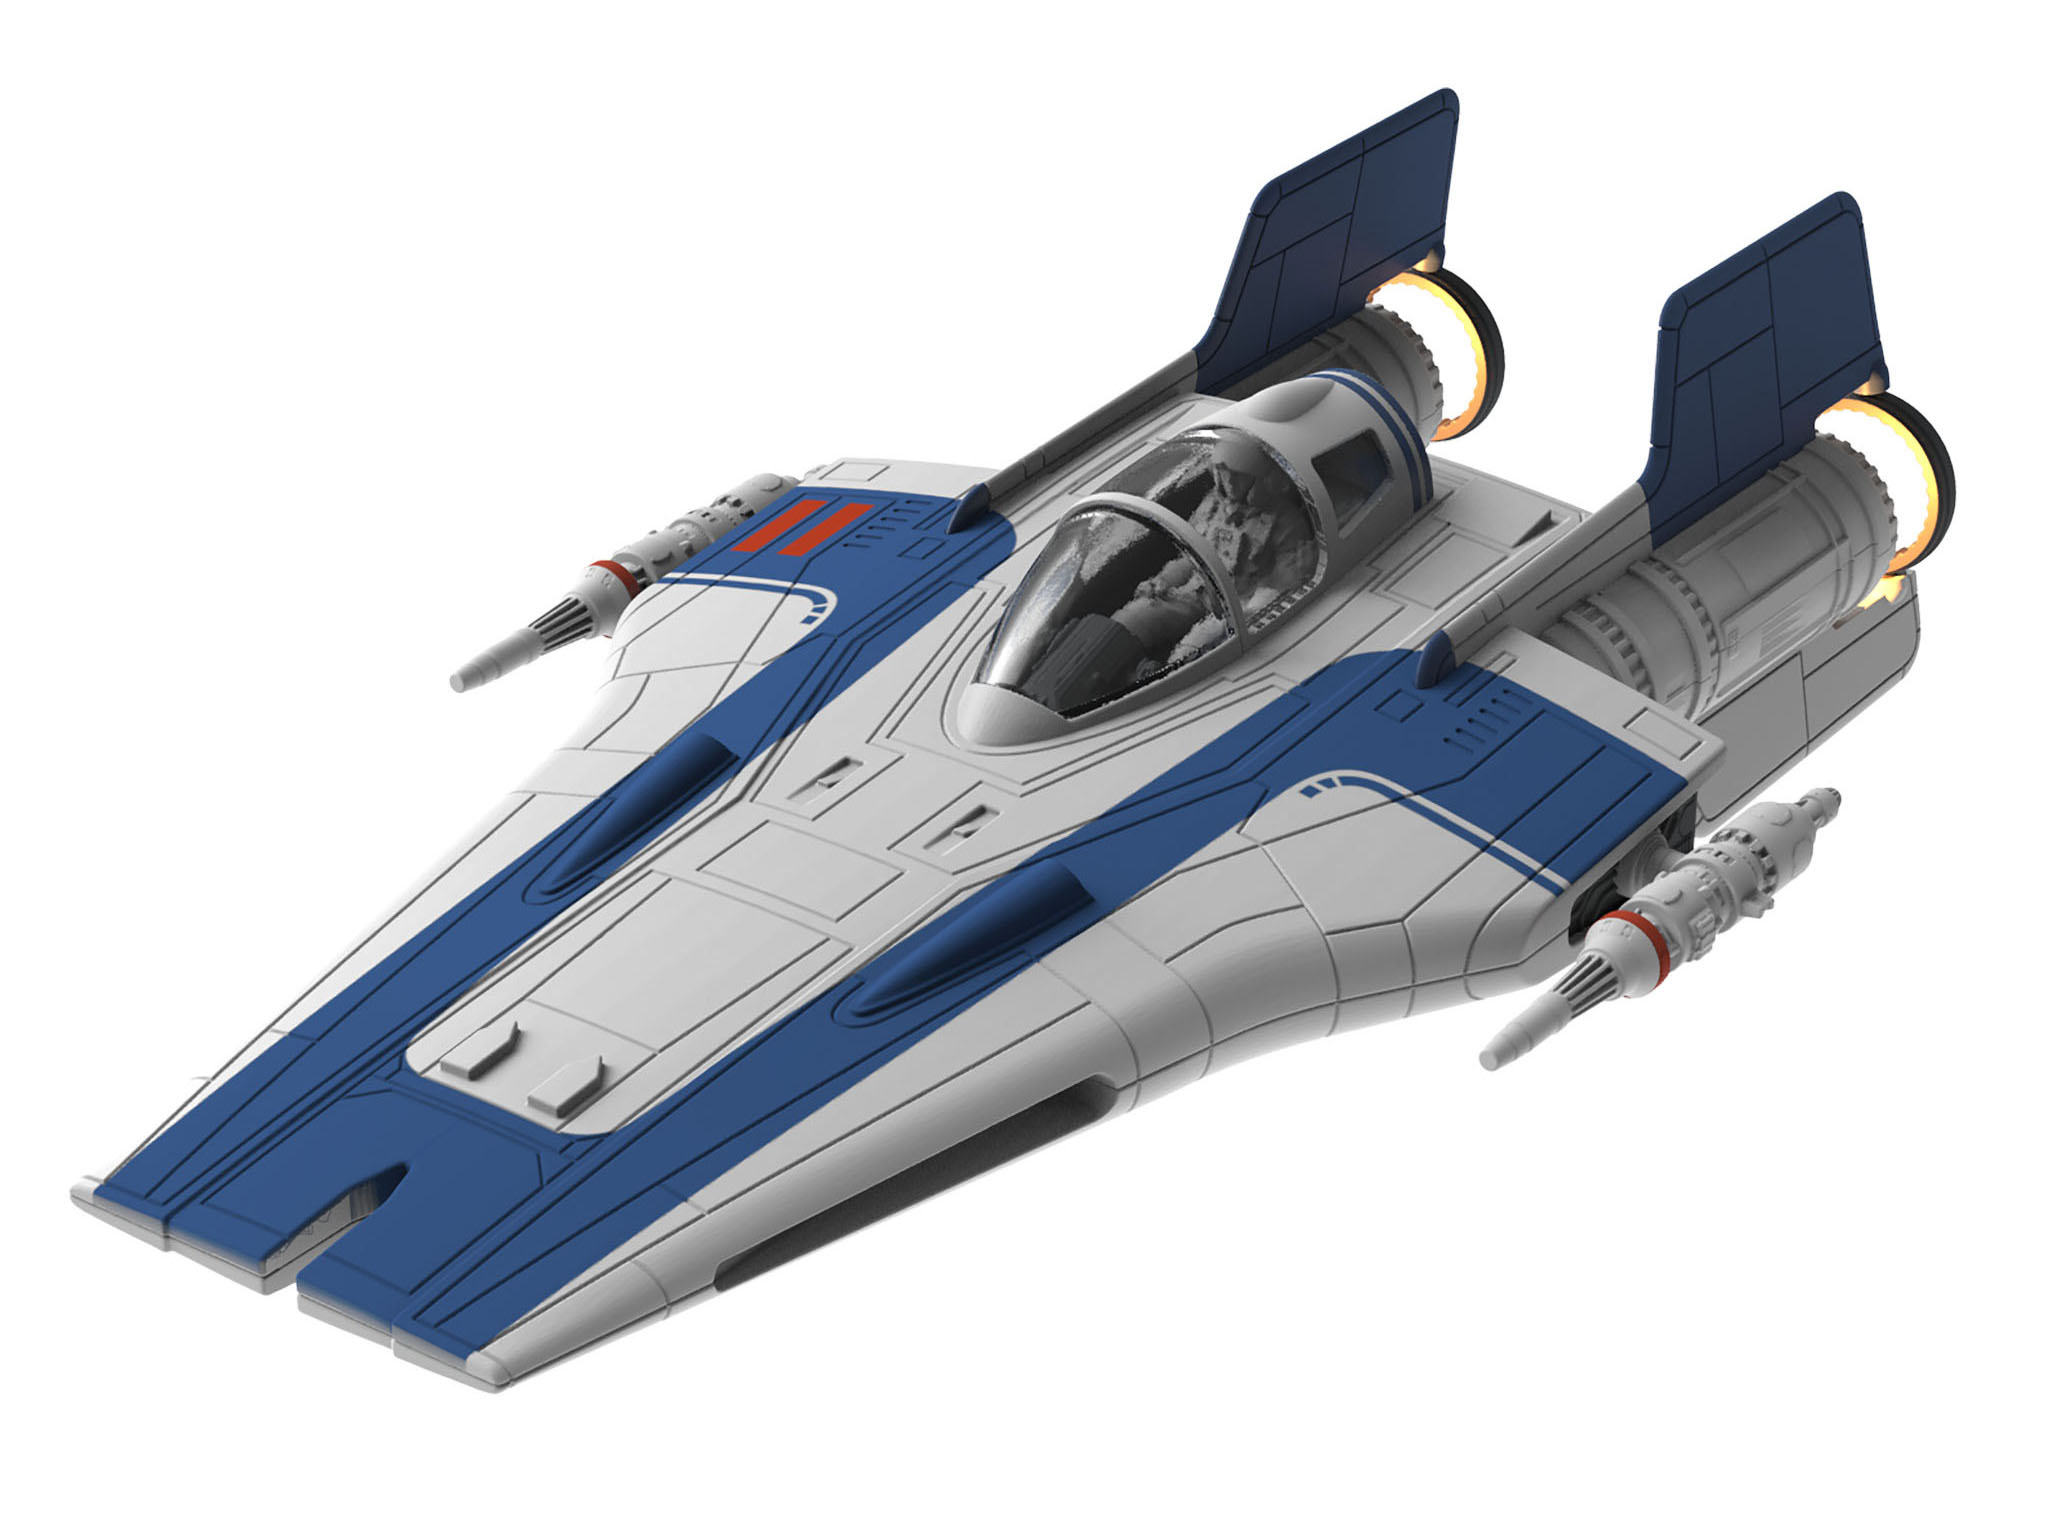 Revell 06773 Resistance A-WING Fighter STAR WARS